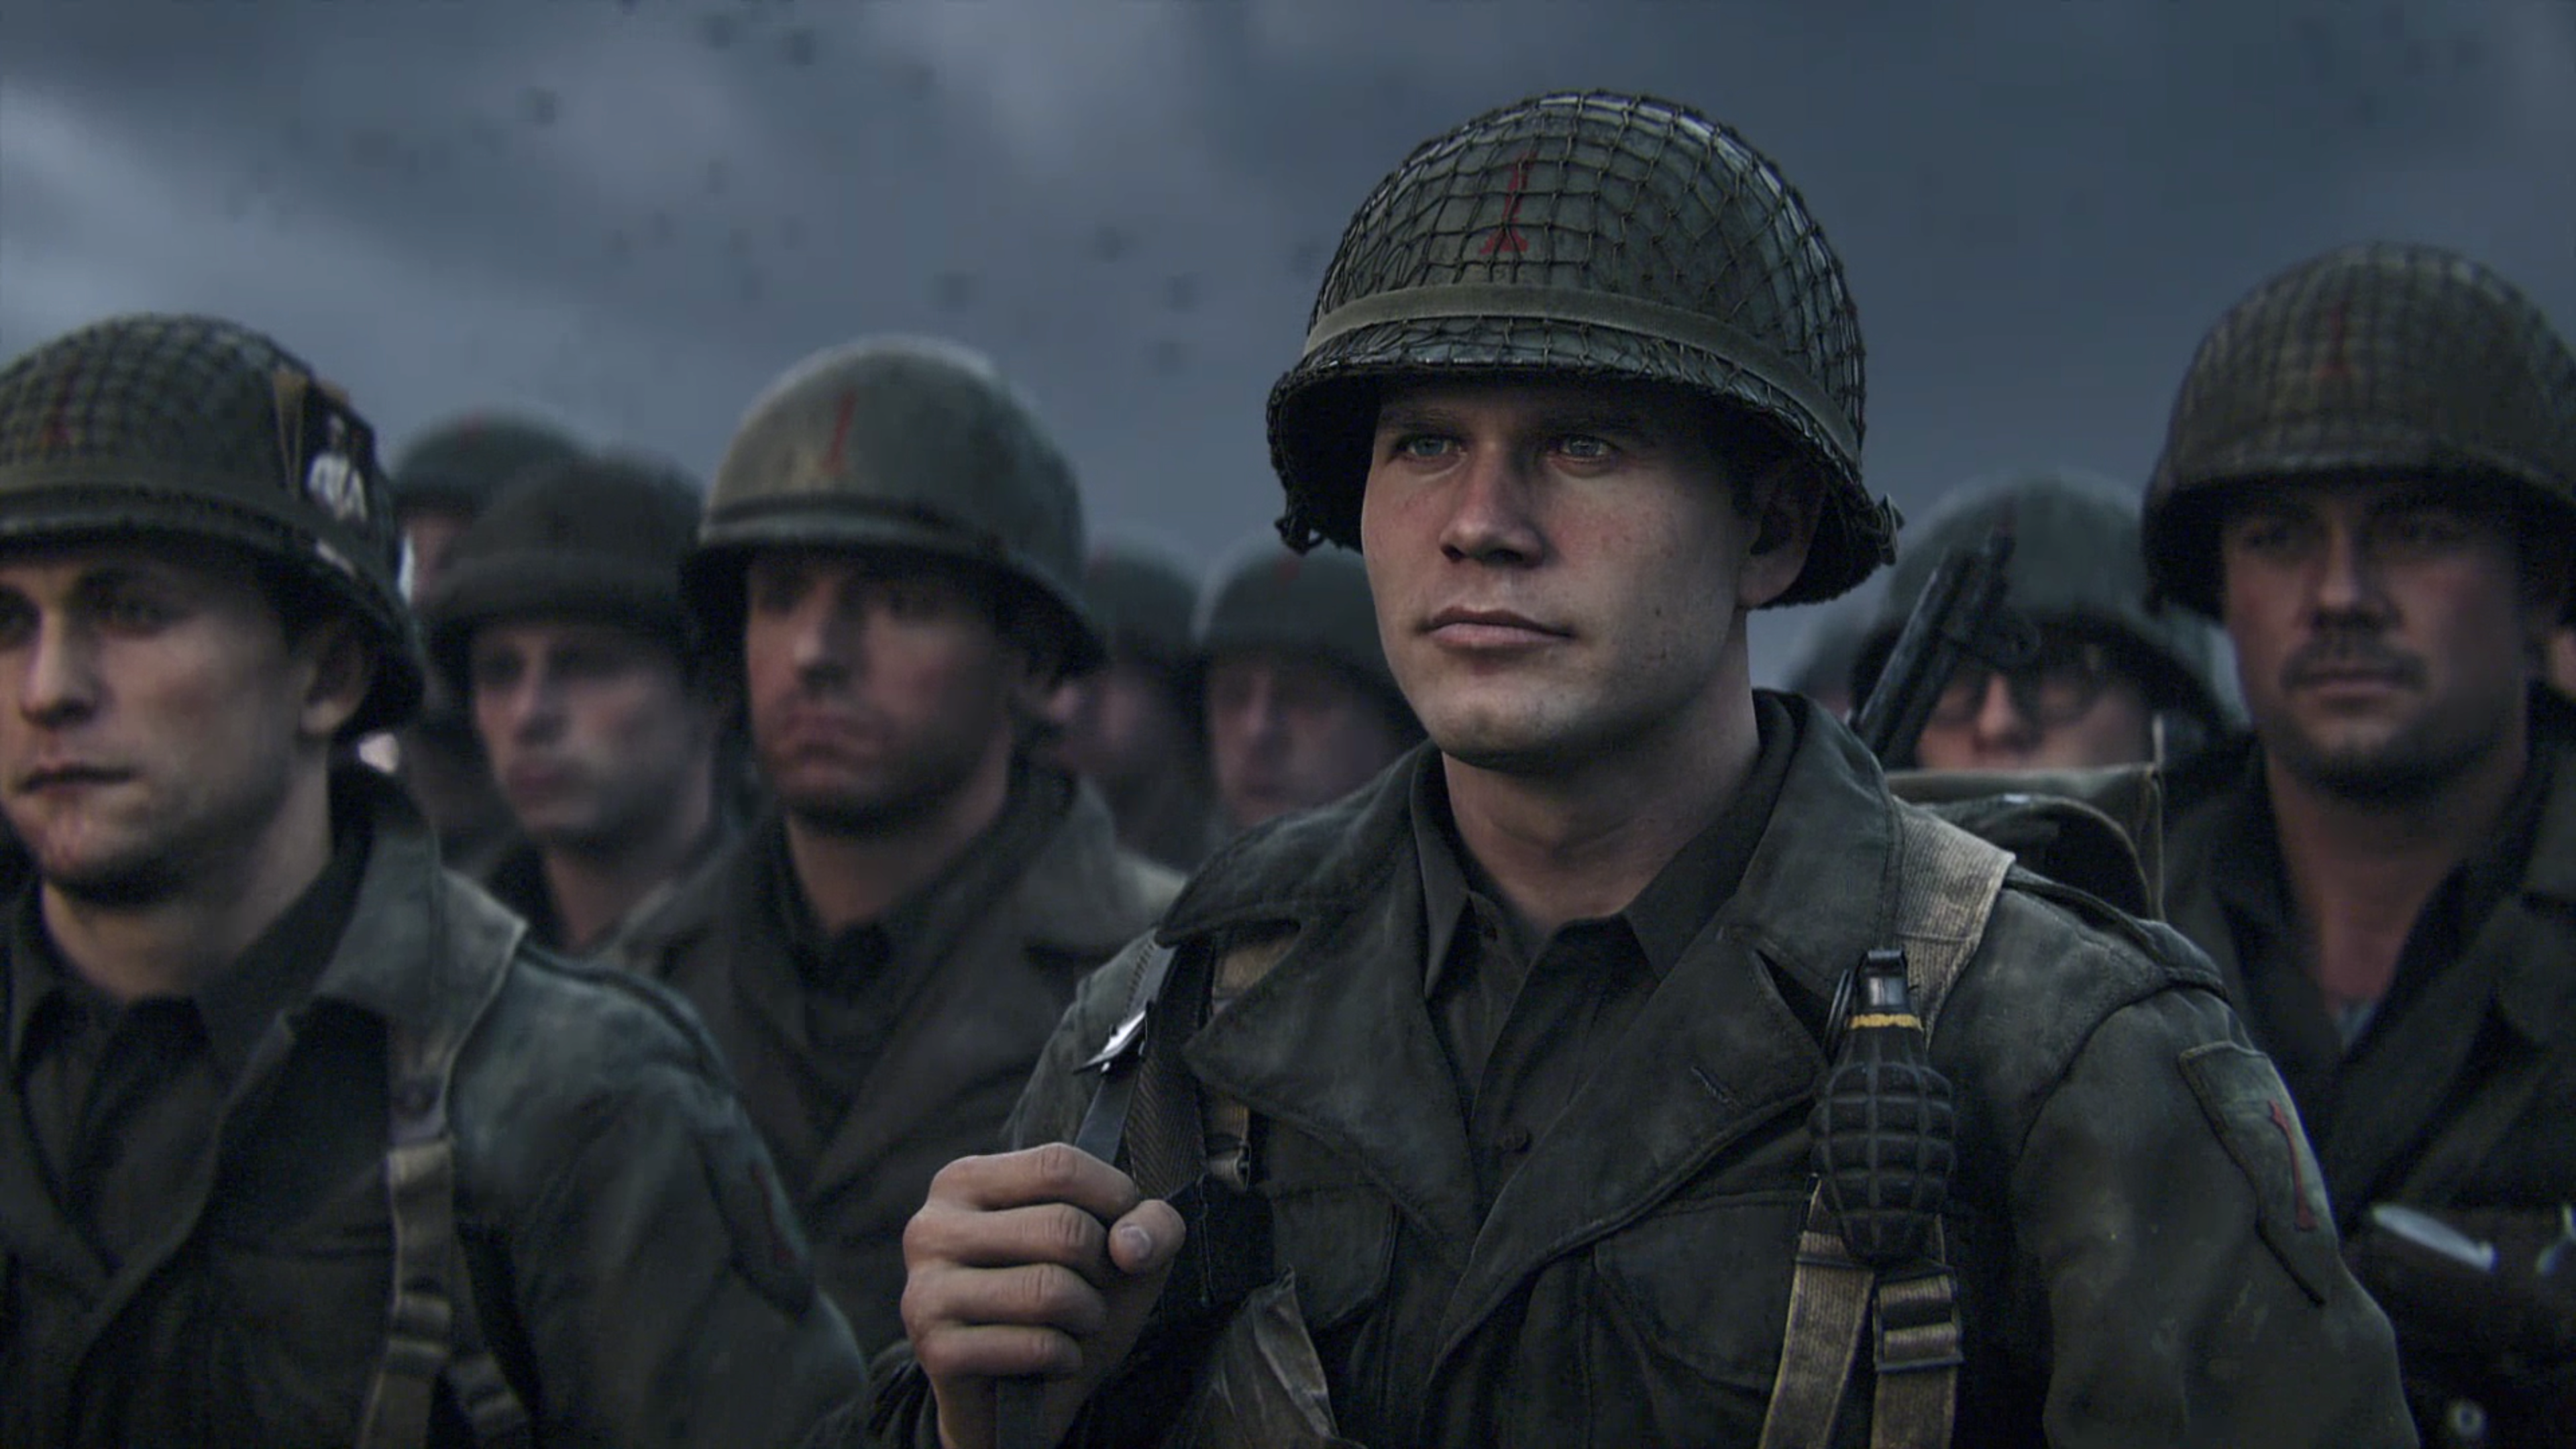 Call of Duty WWII, Xbox One vs Xbox One X, 4K Graphics Comparison